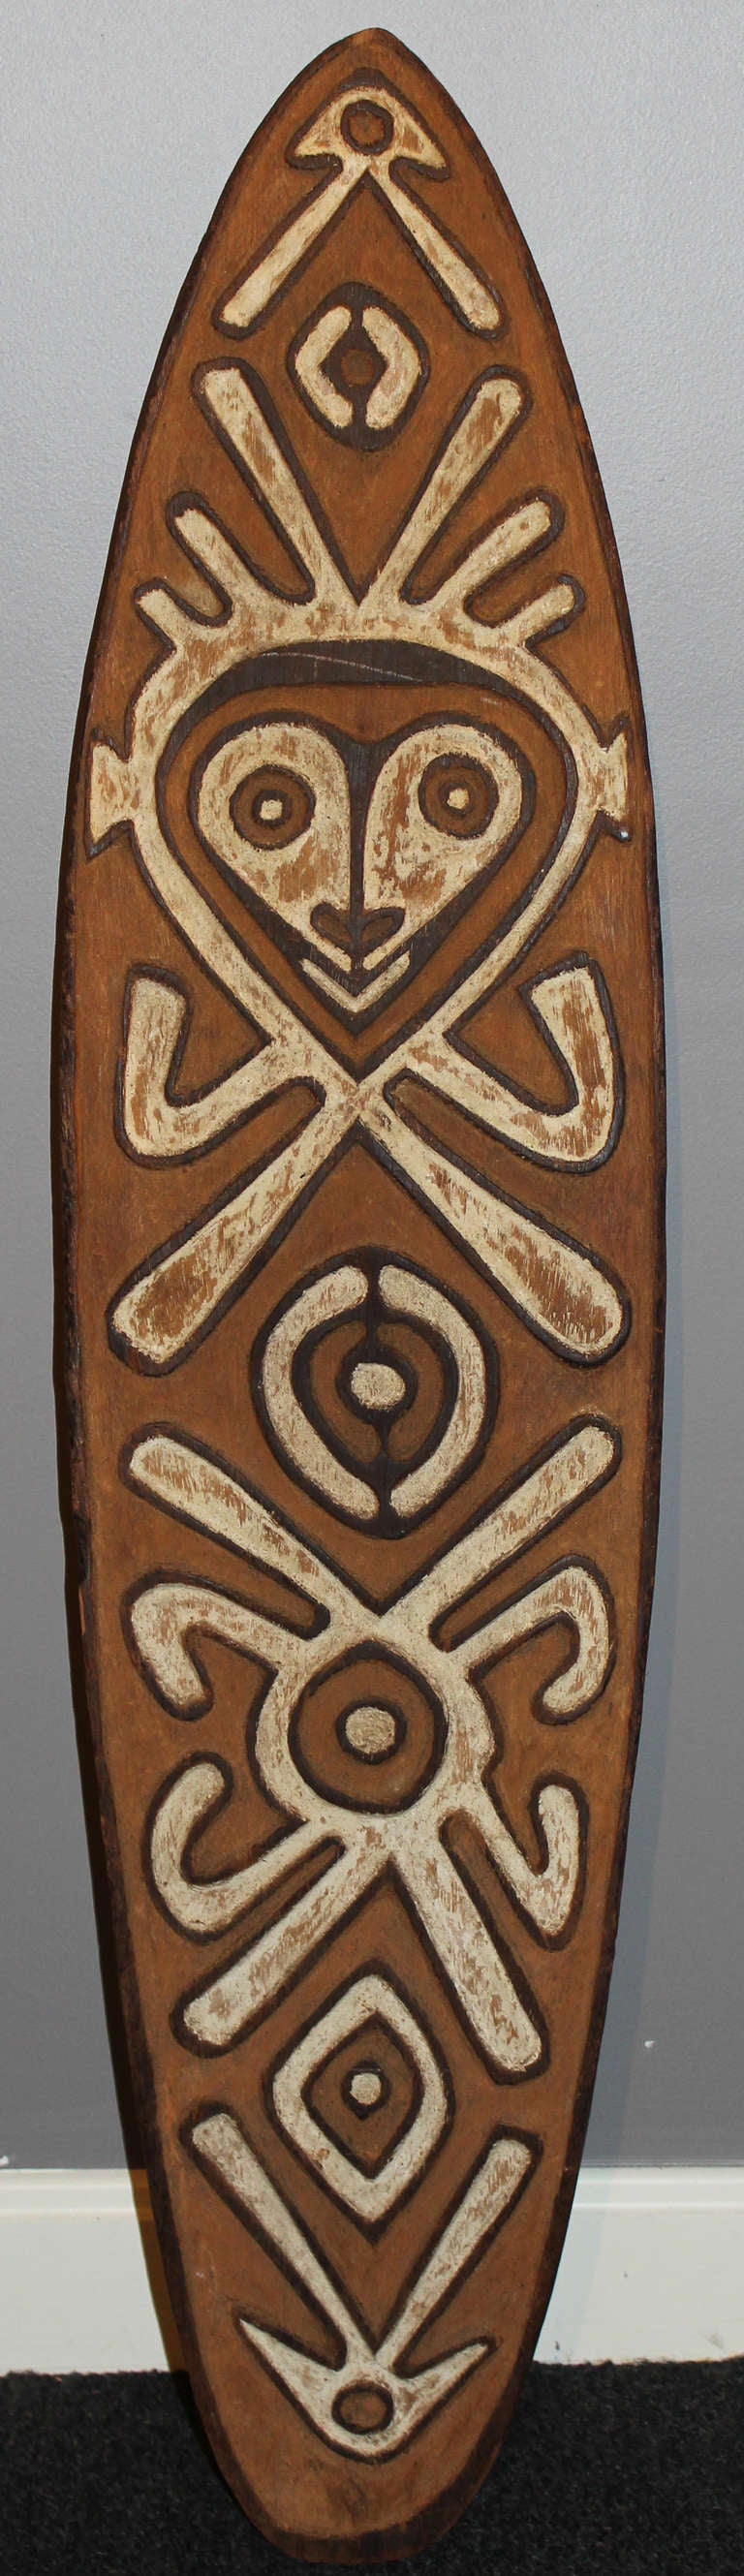 This board is Central Papuan Gulf style with white designs against a red ground with black outlining.